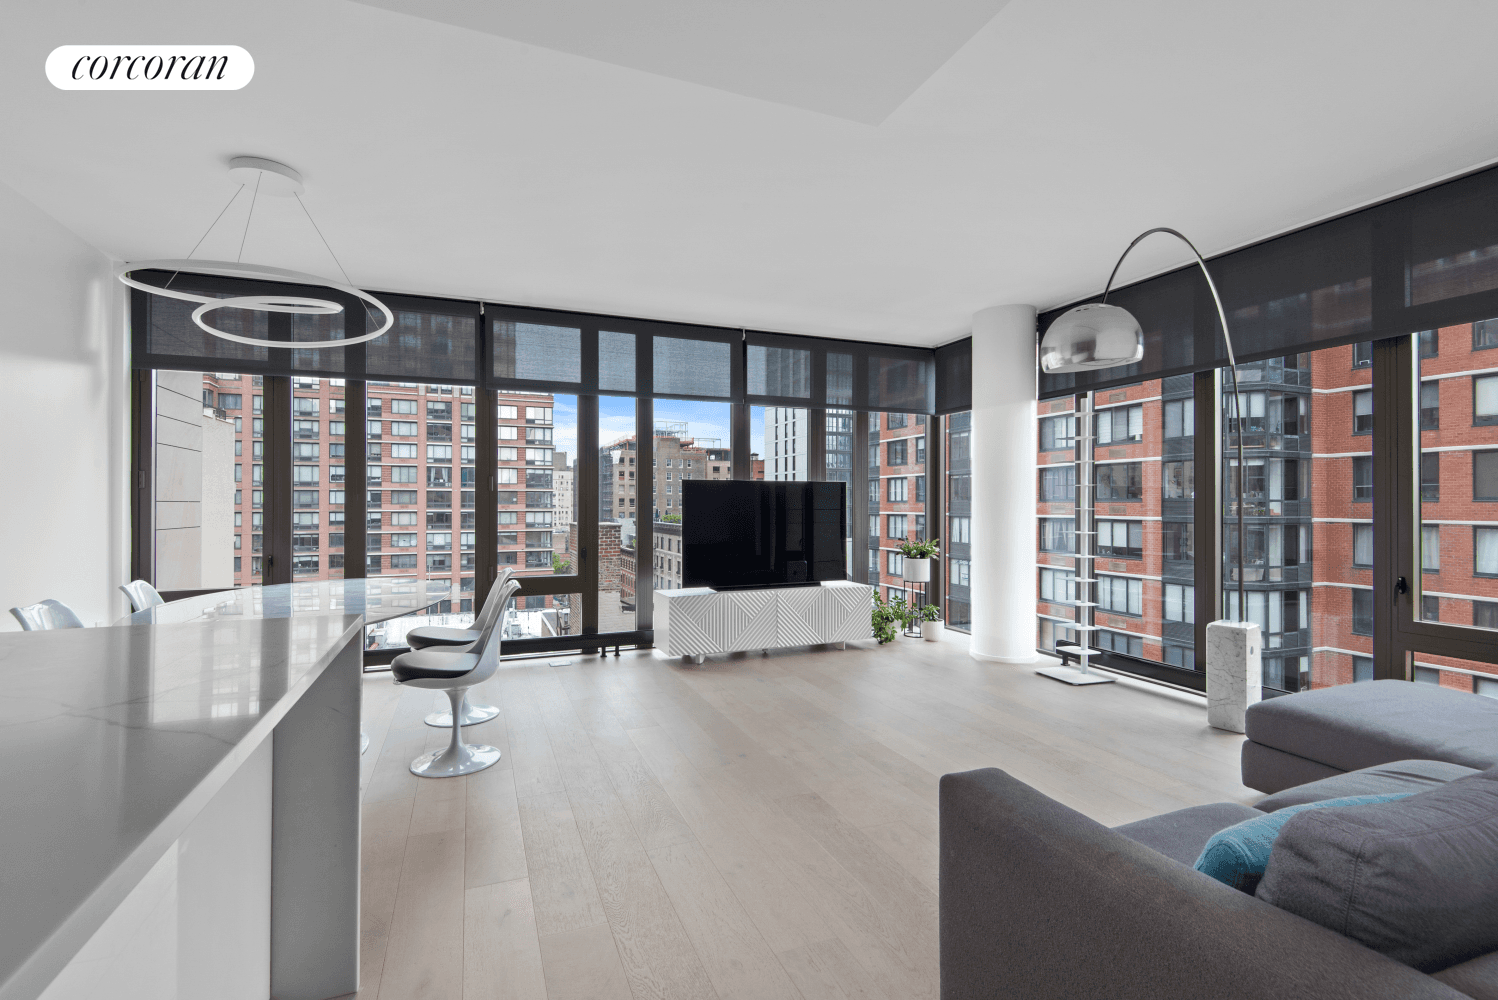 Welcome home to The Dahlia, an exquisite condo that defines elegance, located in the highly desirable Upper West Side neighborhood of New York City.